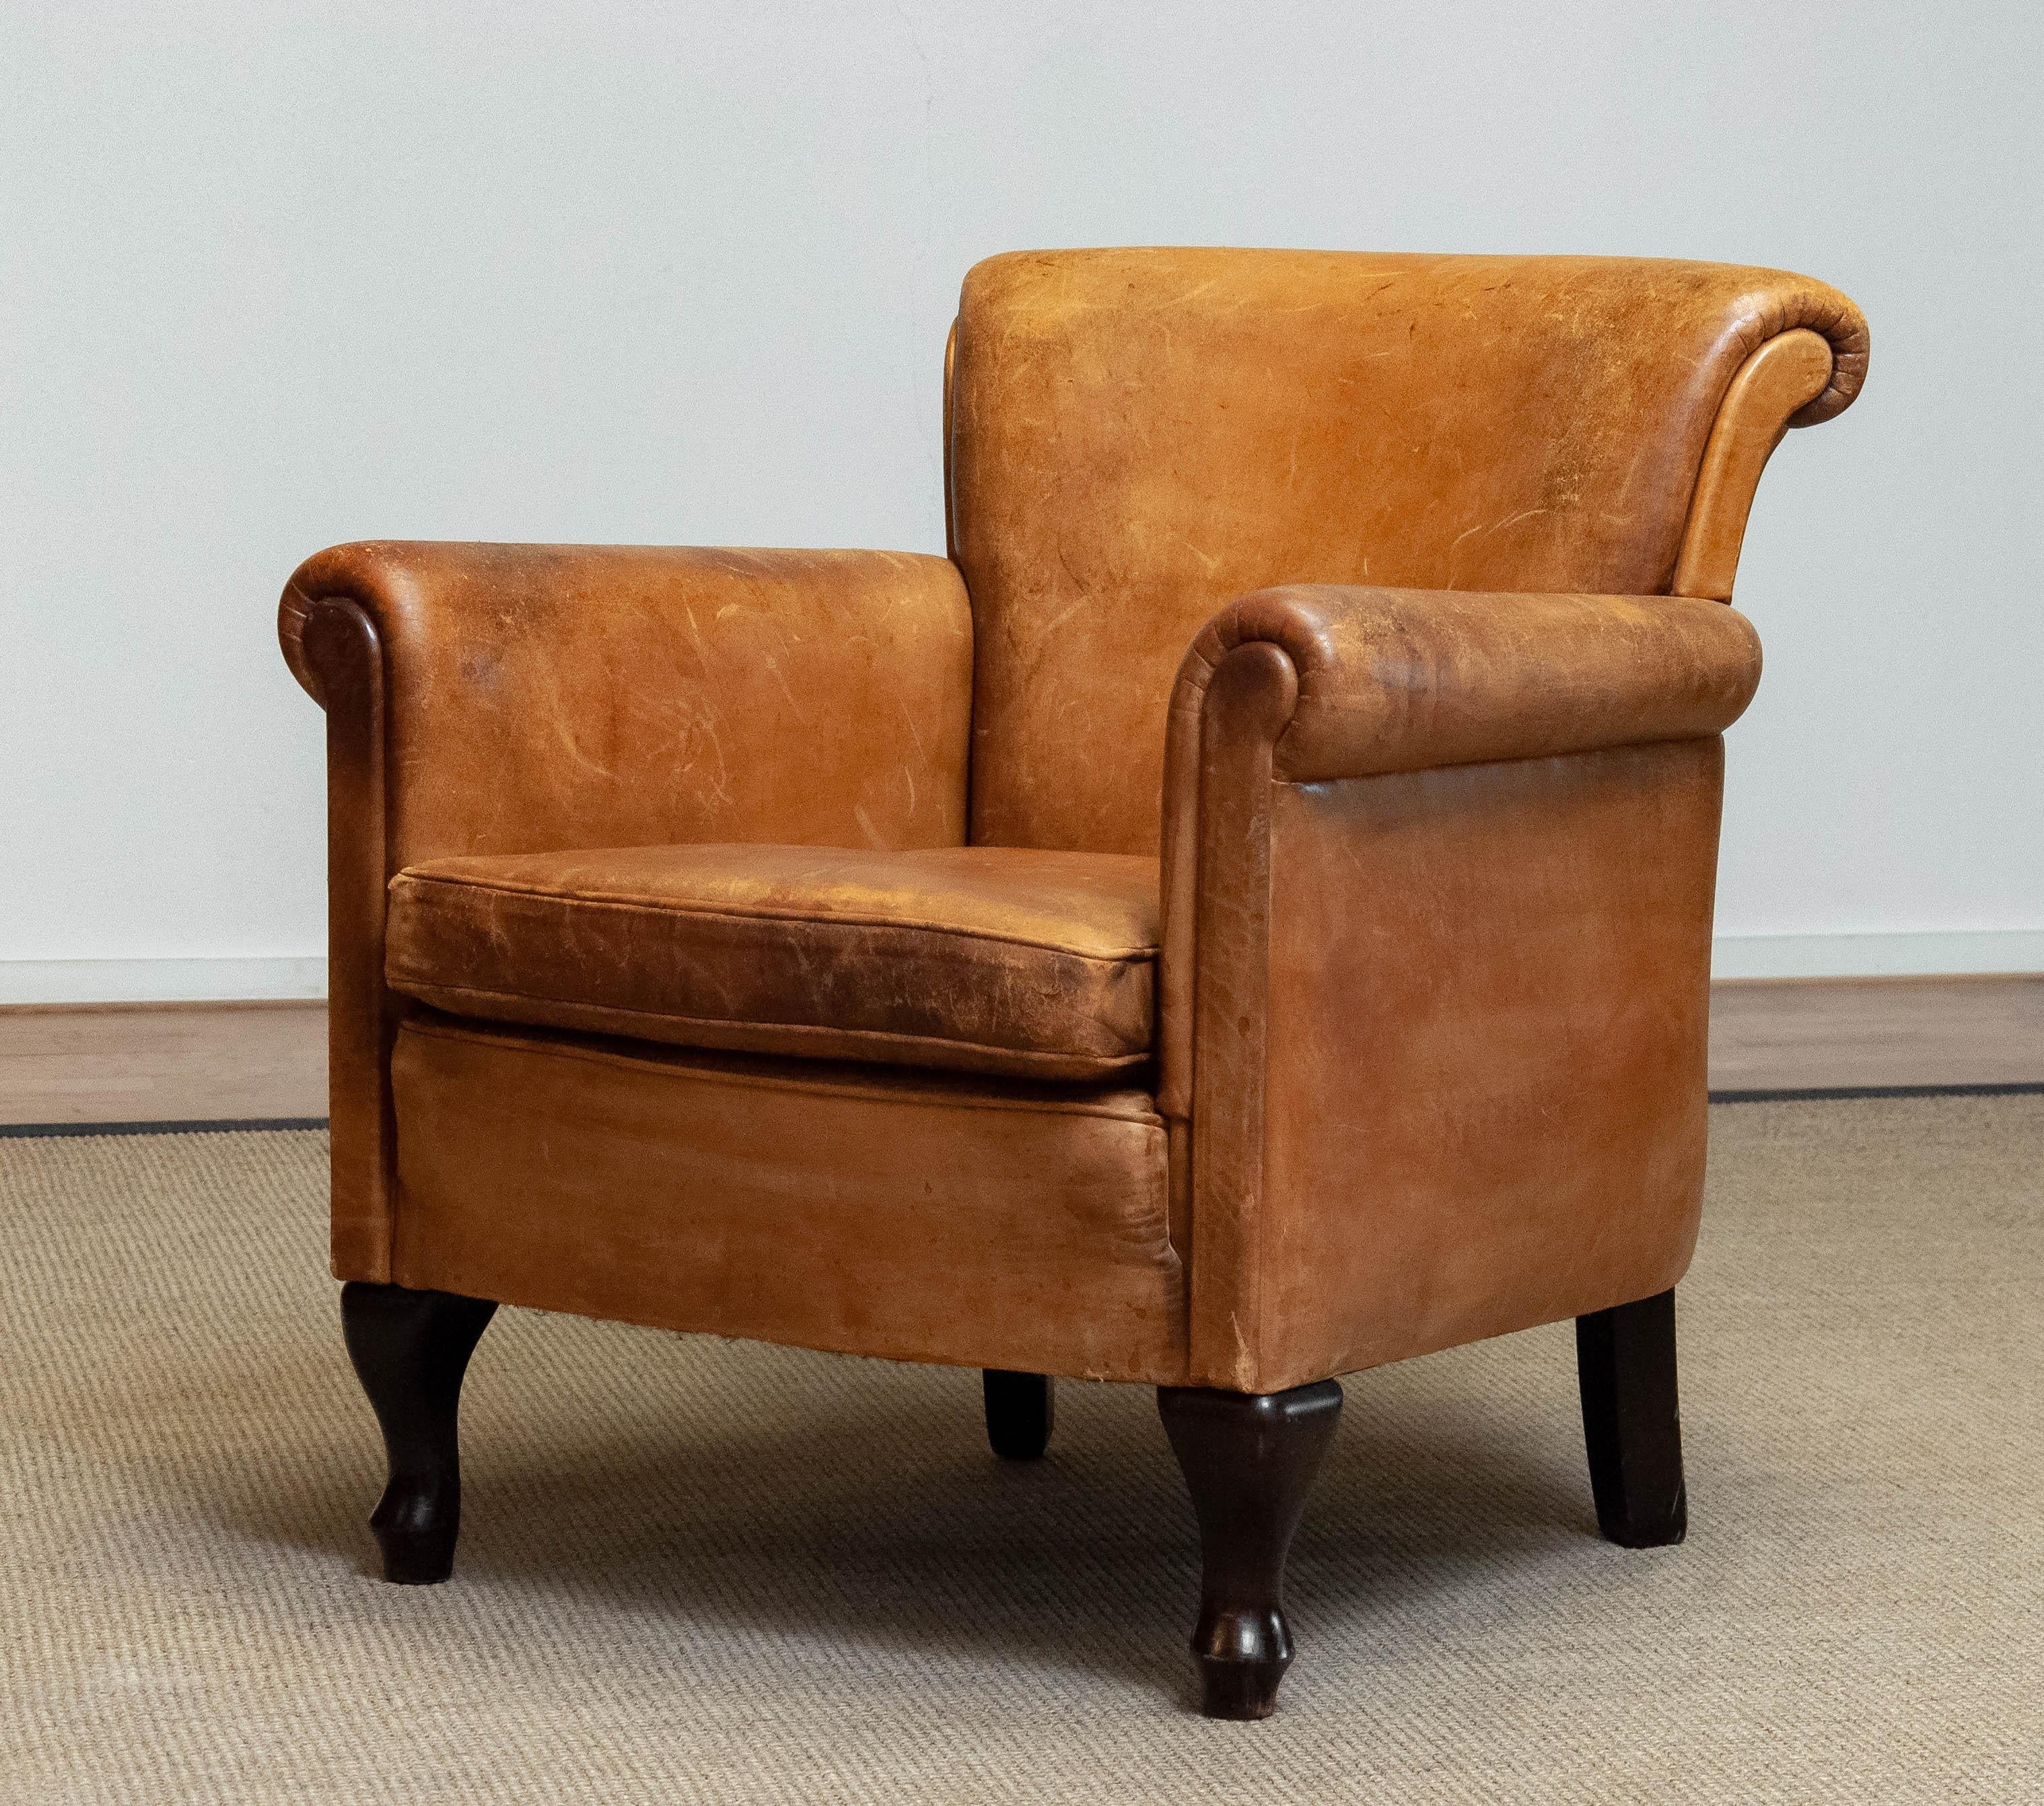 1960s Brown / Tan French Art Deco 'Sheep' Leather Roll Back Lounge / Club Chair For Sale 4